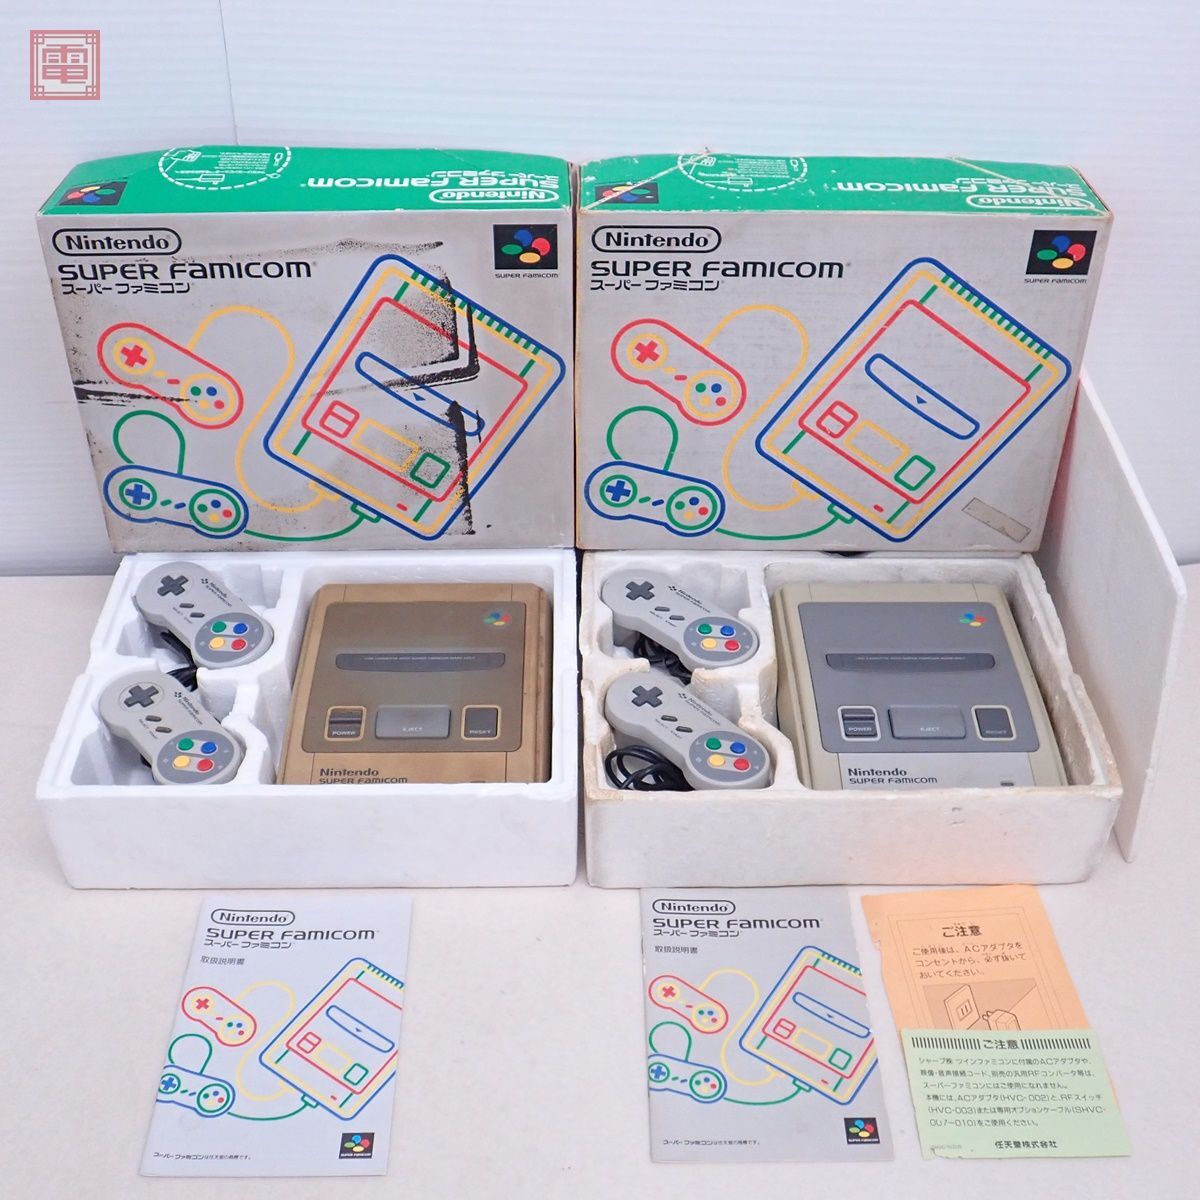  serial coincidence SFC Hsu fami Super Famicom body together 4 pcs. set nintendo Nintendo box opinion attaching operation not yet verification parts taking .. please [40